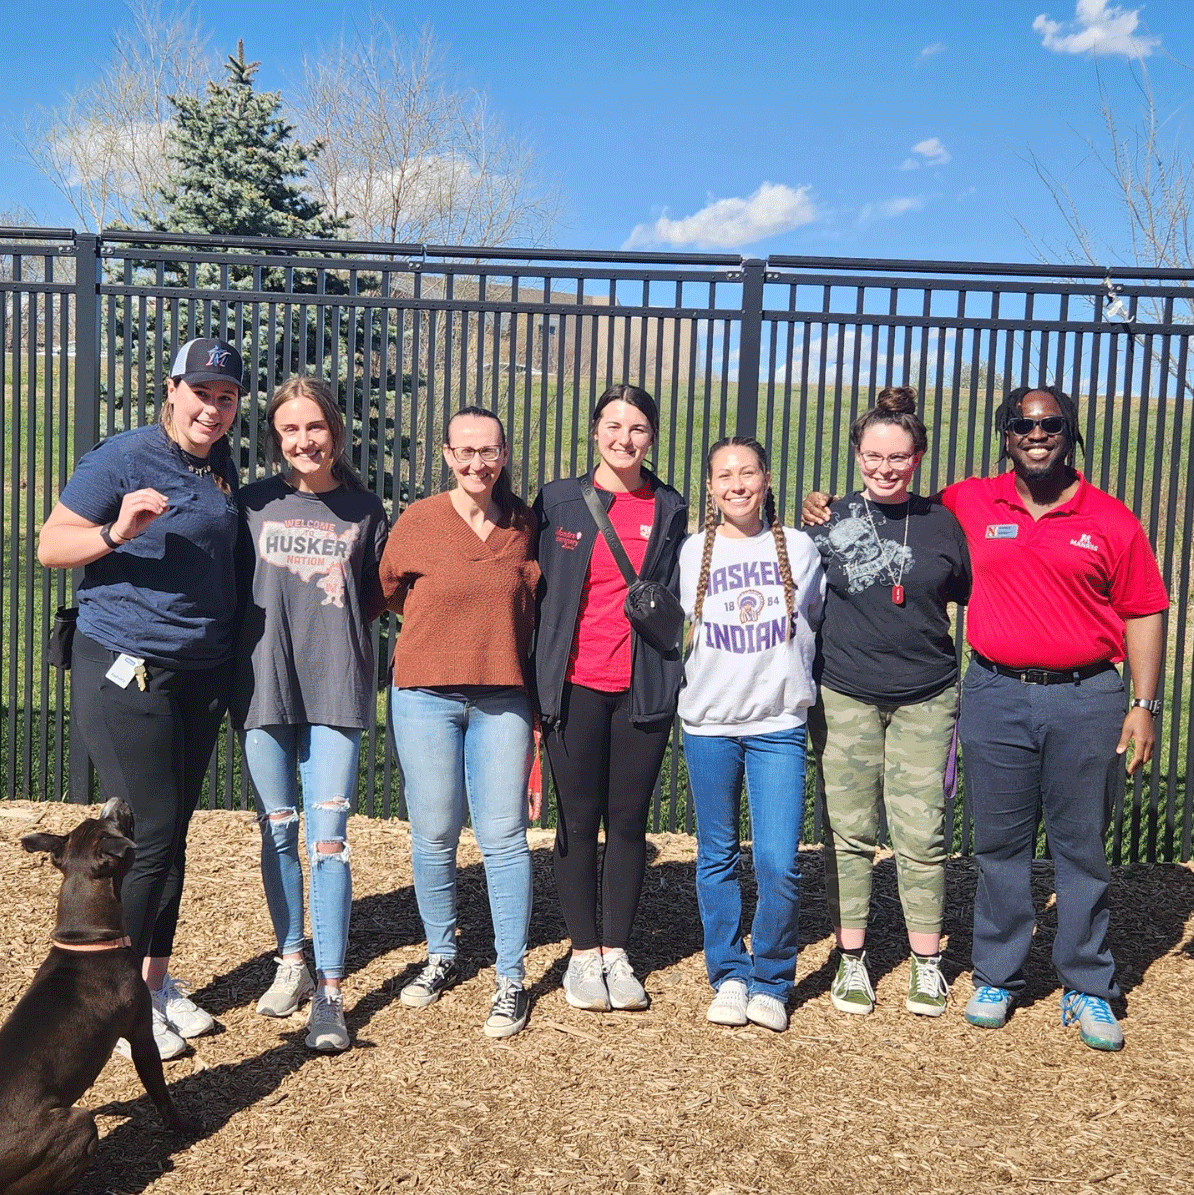 Thank you to all who volunteered at the Humane Society as part of Celebrate CASNR's Days of Service.